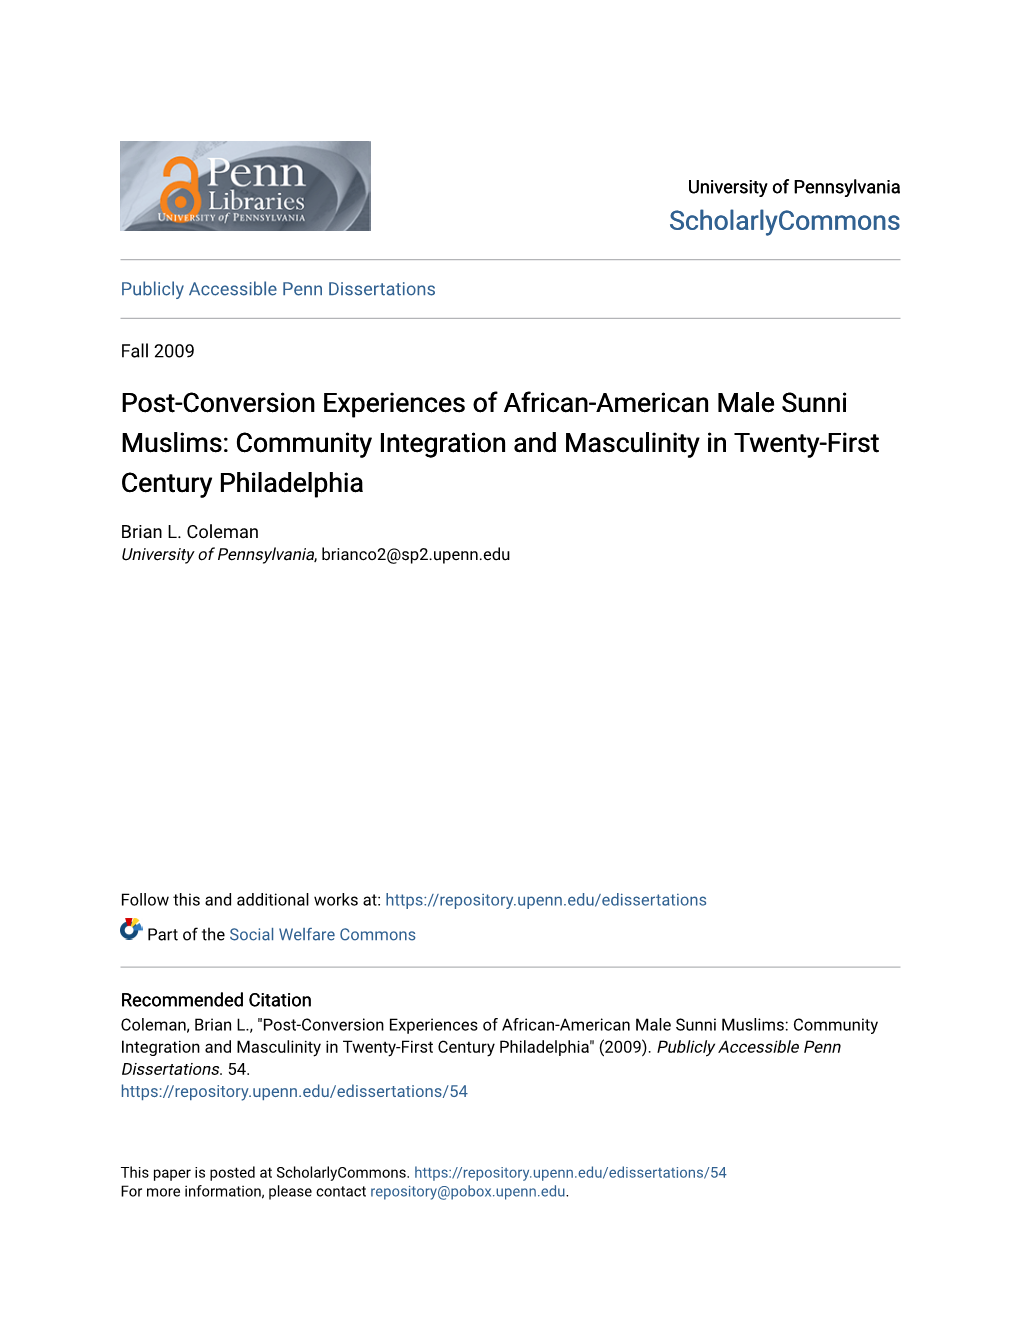 Post-Conversion Experiences of African-American Male Sunni Muslims: Community Integration and Masculinity in Twenty-First Century Philadelphia